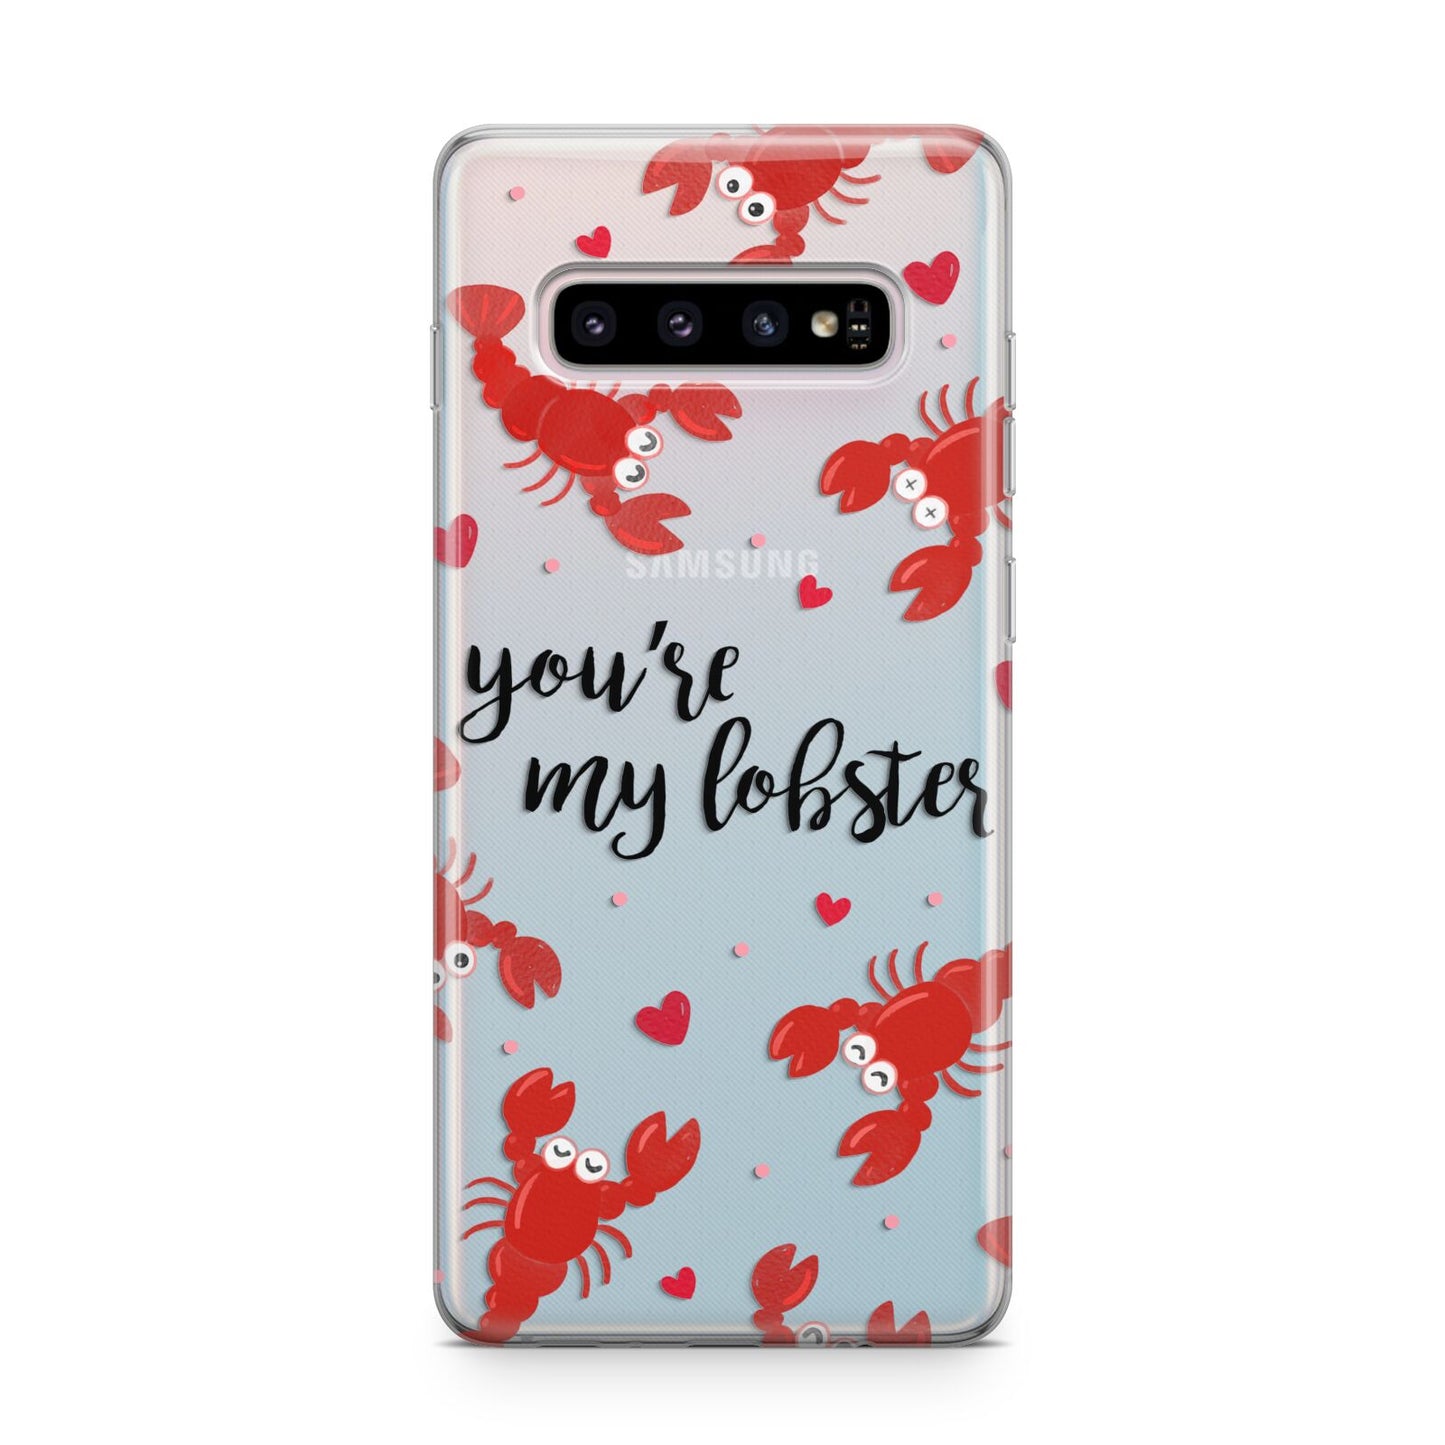 Youre My Lobster Samsung Galaxy S10 Plus Case